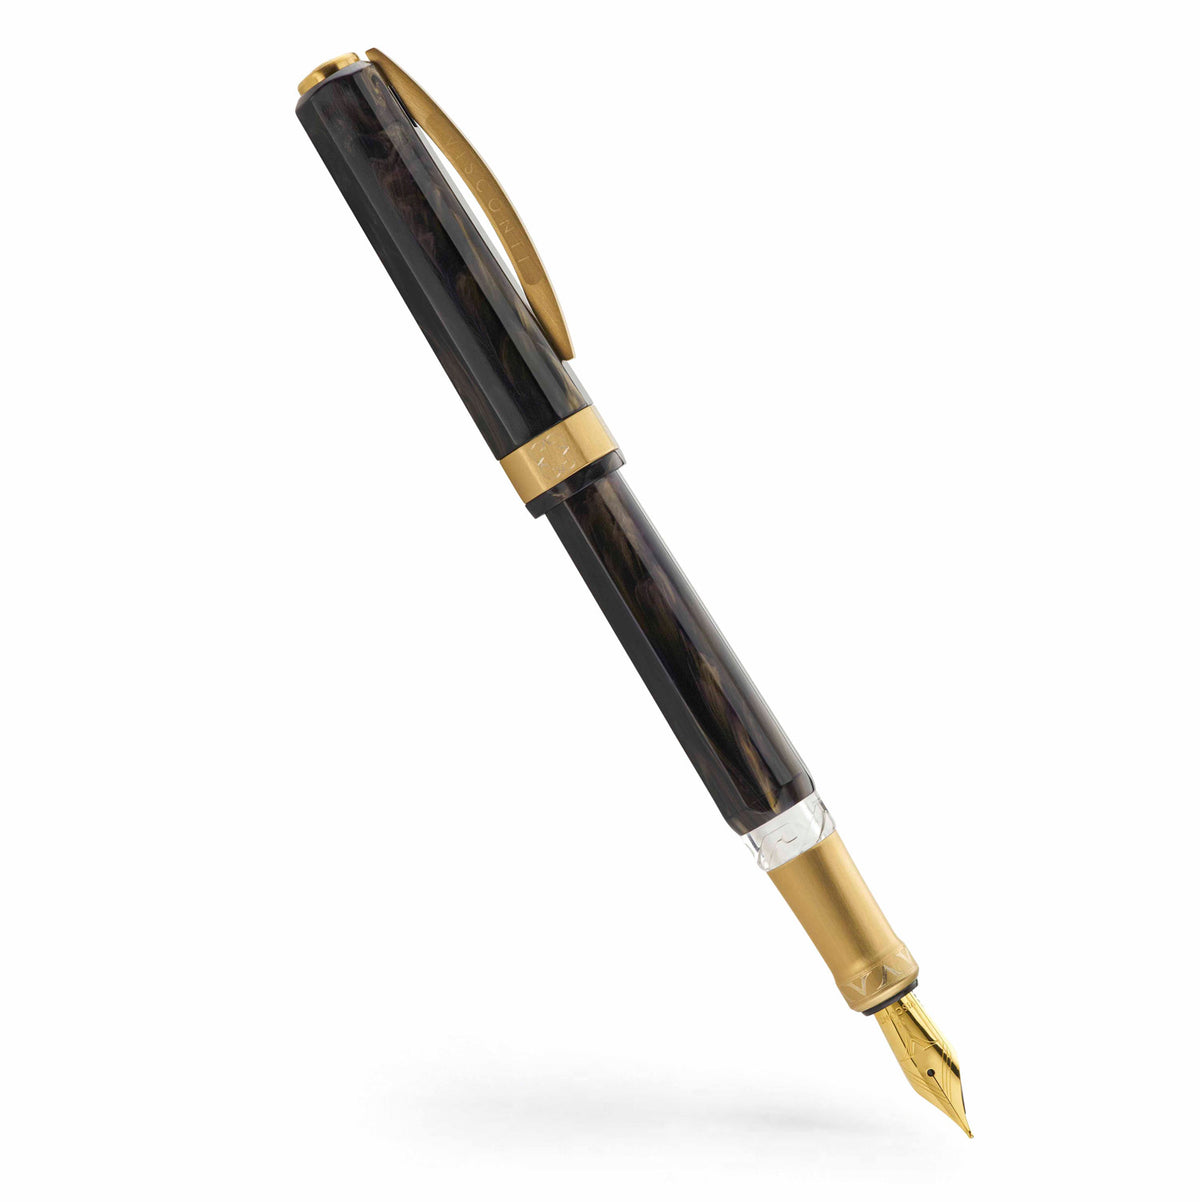 A Coles of London Visconti Opera Gold Black fountain pen on a white background.